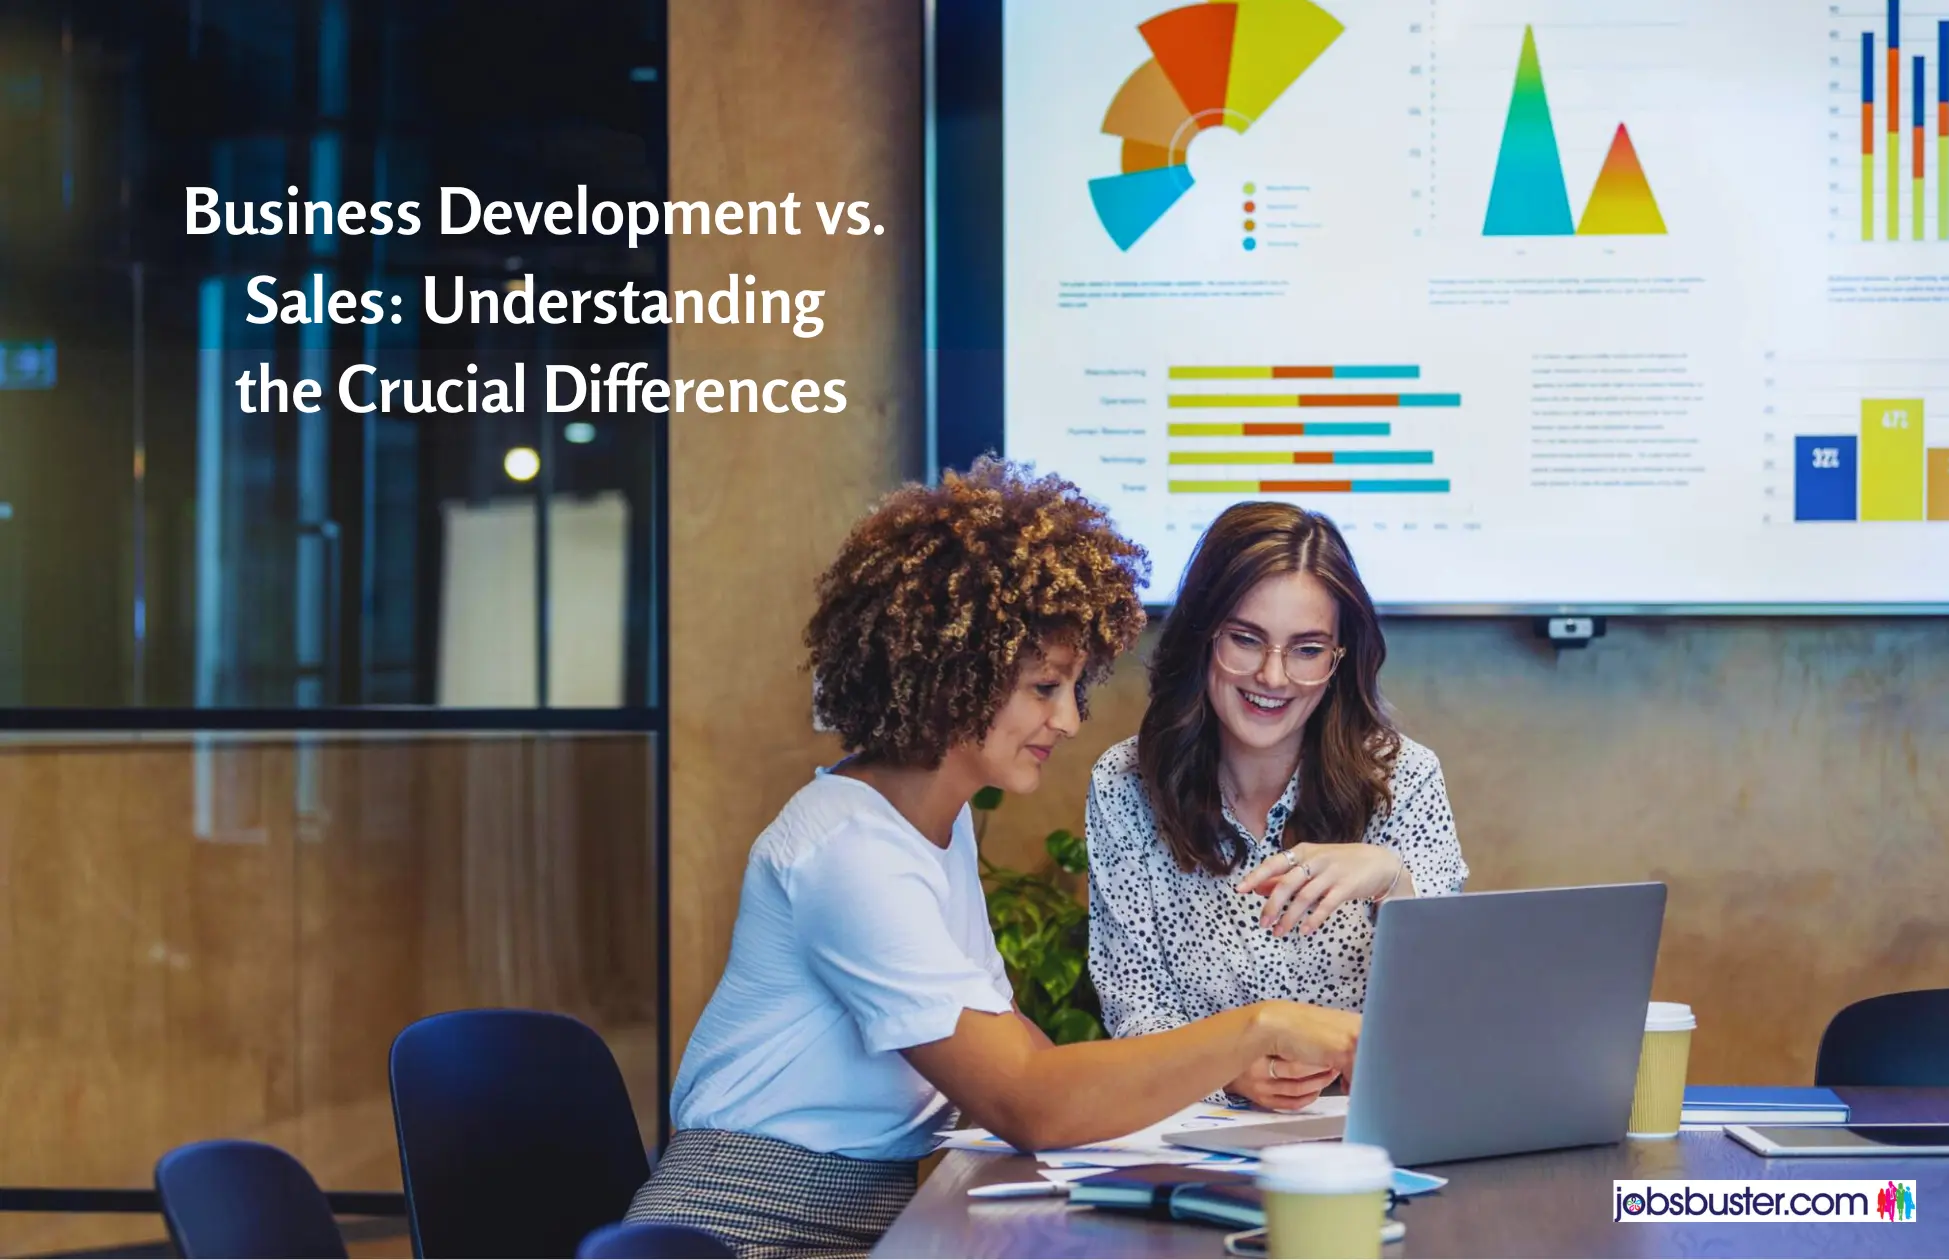 Business Development vs. Sales: Understanding the Crucial Differences